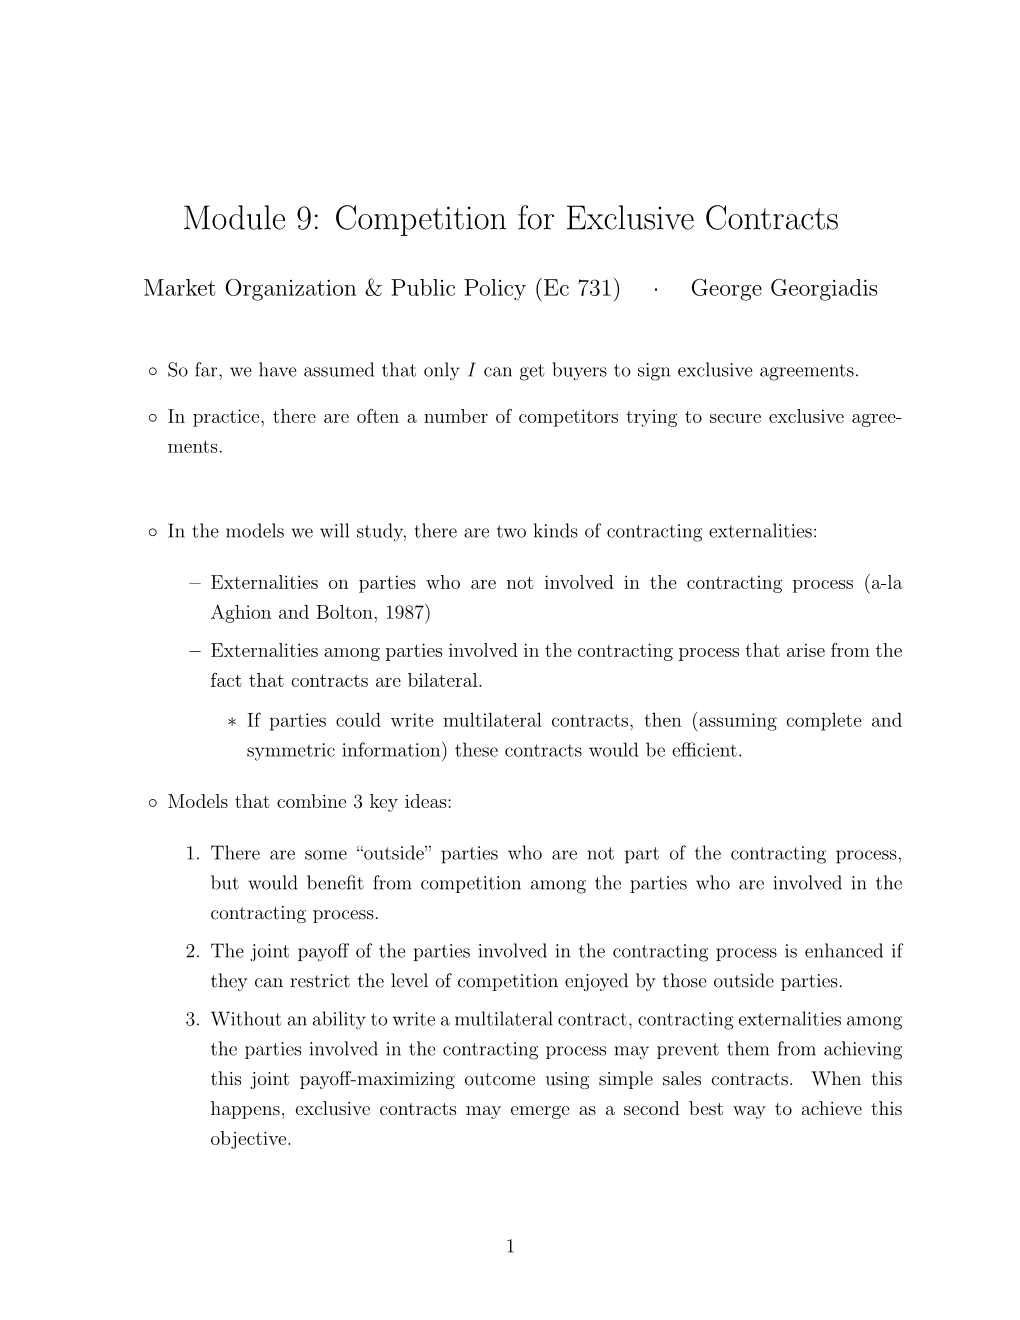 Module 9: Competition for Exclusive Contracts